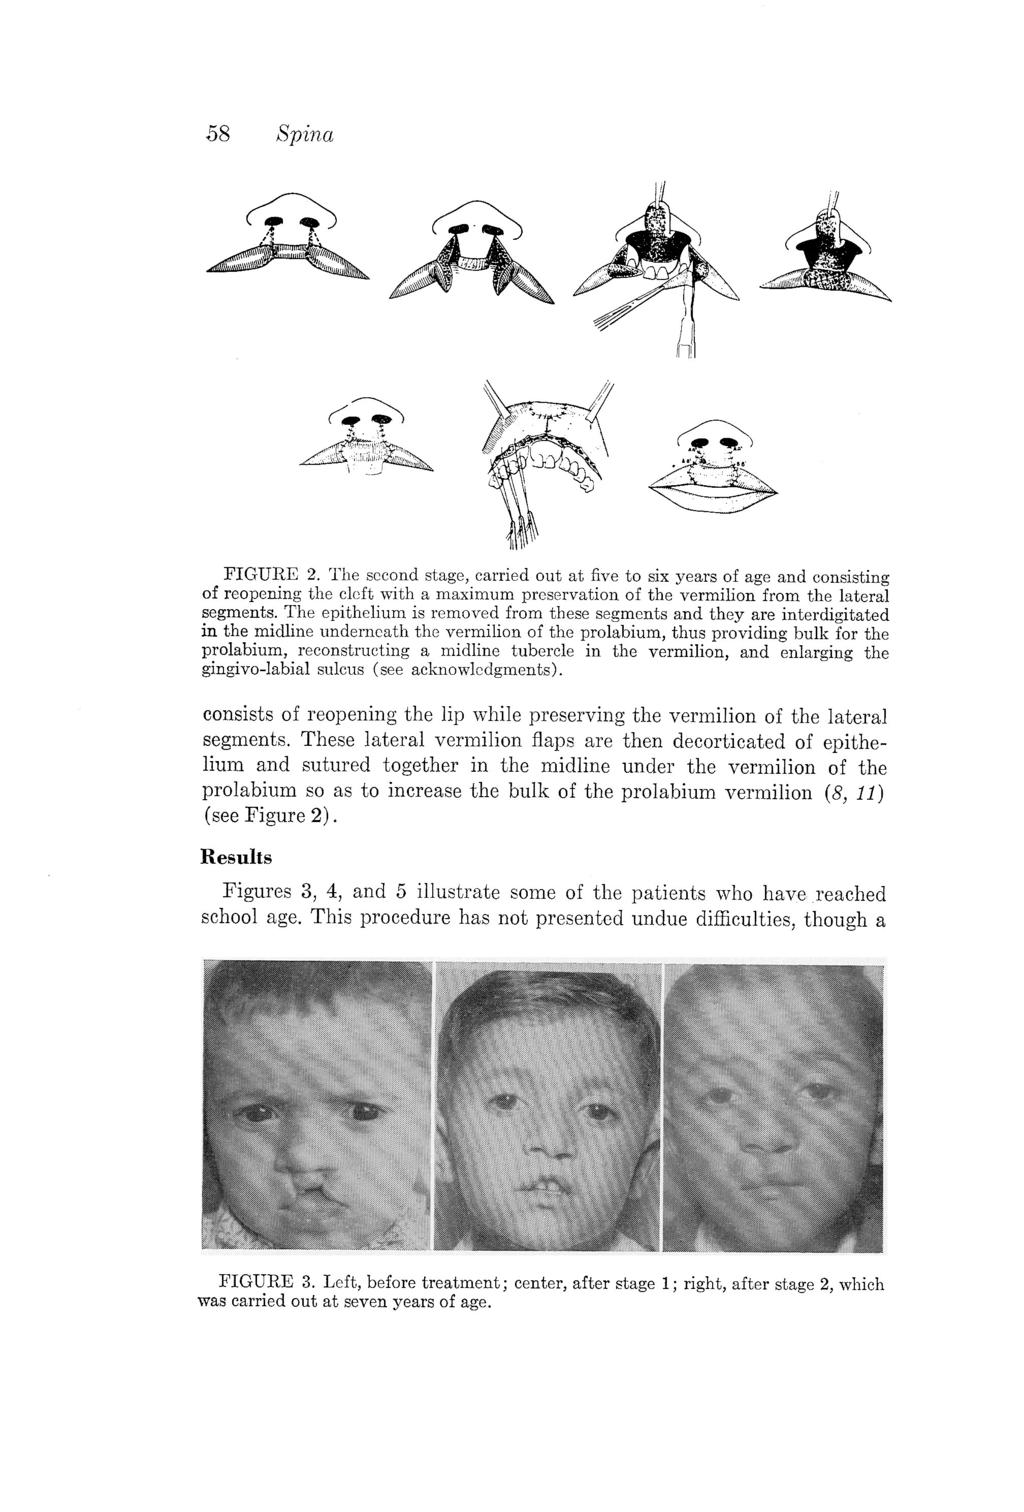 FIGURE 2. The second stage, carried out at five to six years of age and consisting of reopening the cleft with a maximum preservation of the vermilion from the lateral segments.